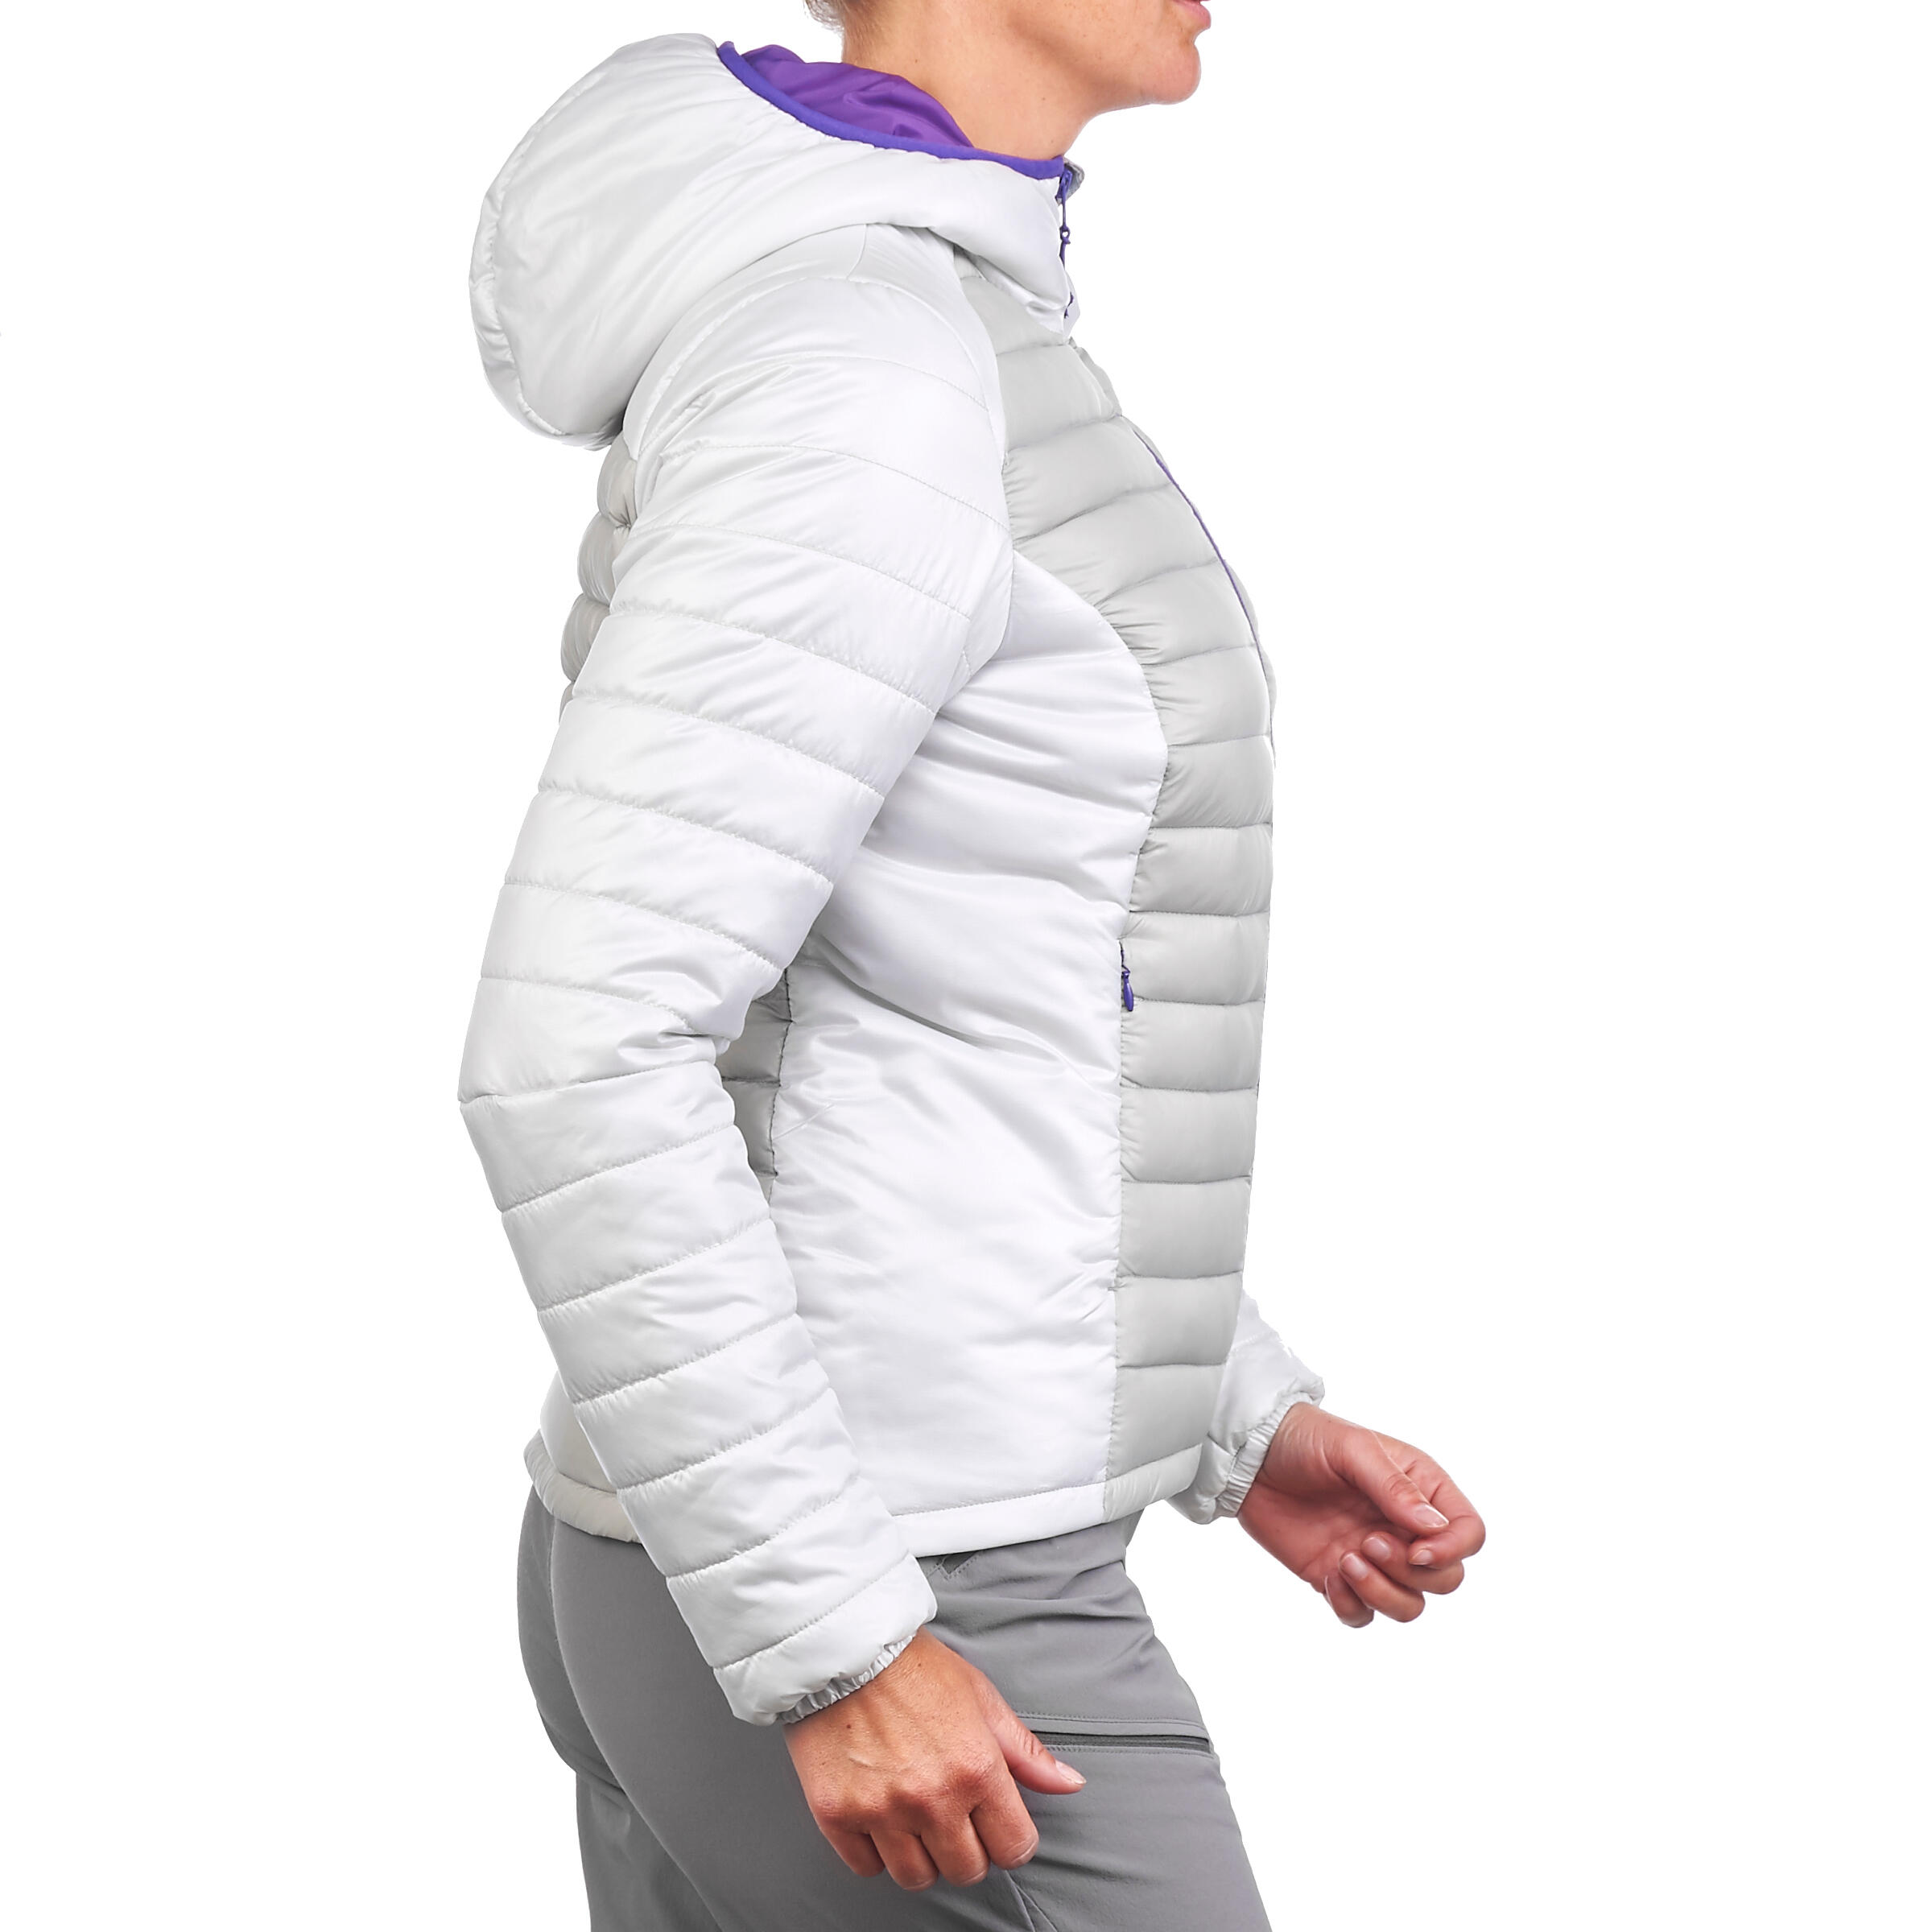 X-Light Women's Quilted Hiking Jacket - Light grey 4/15